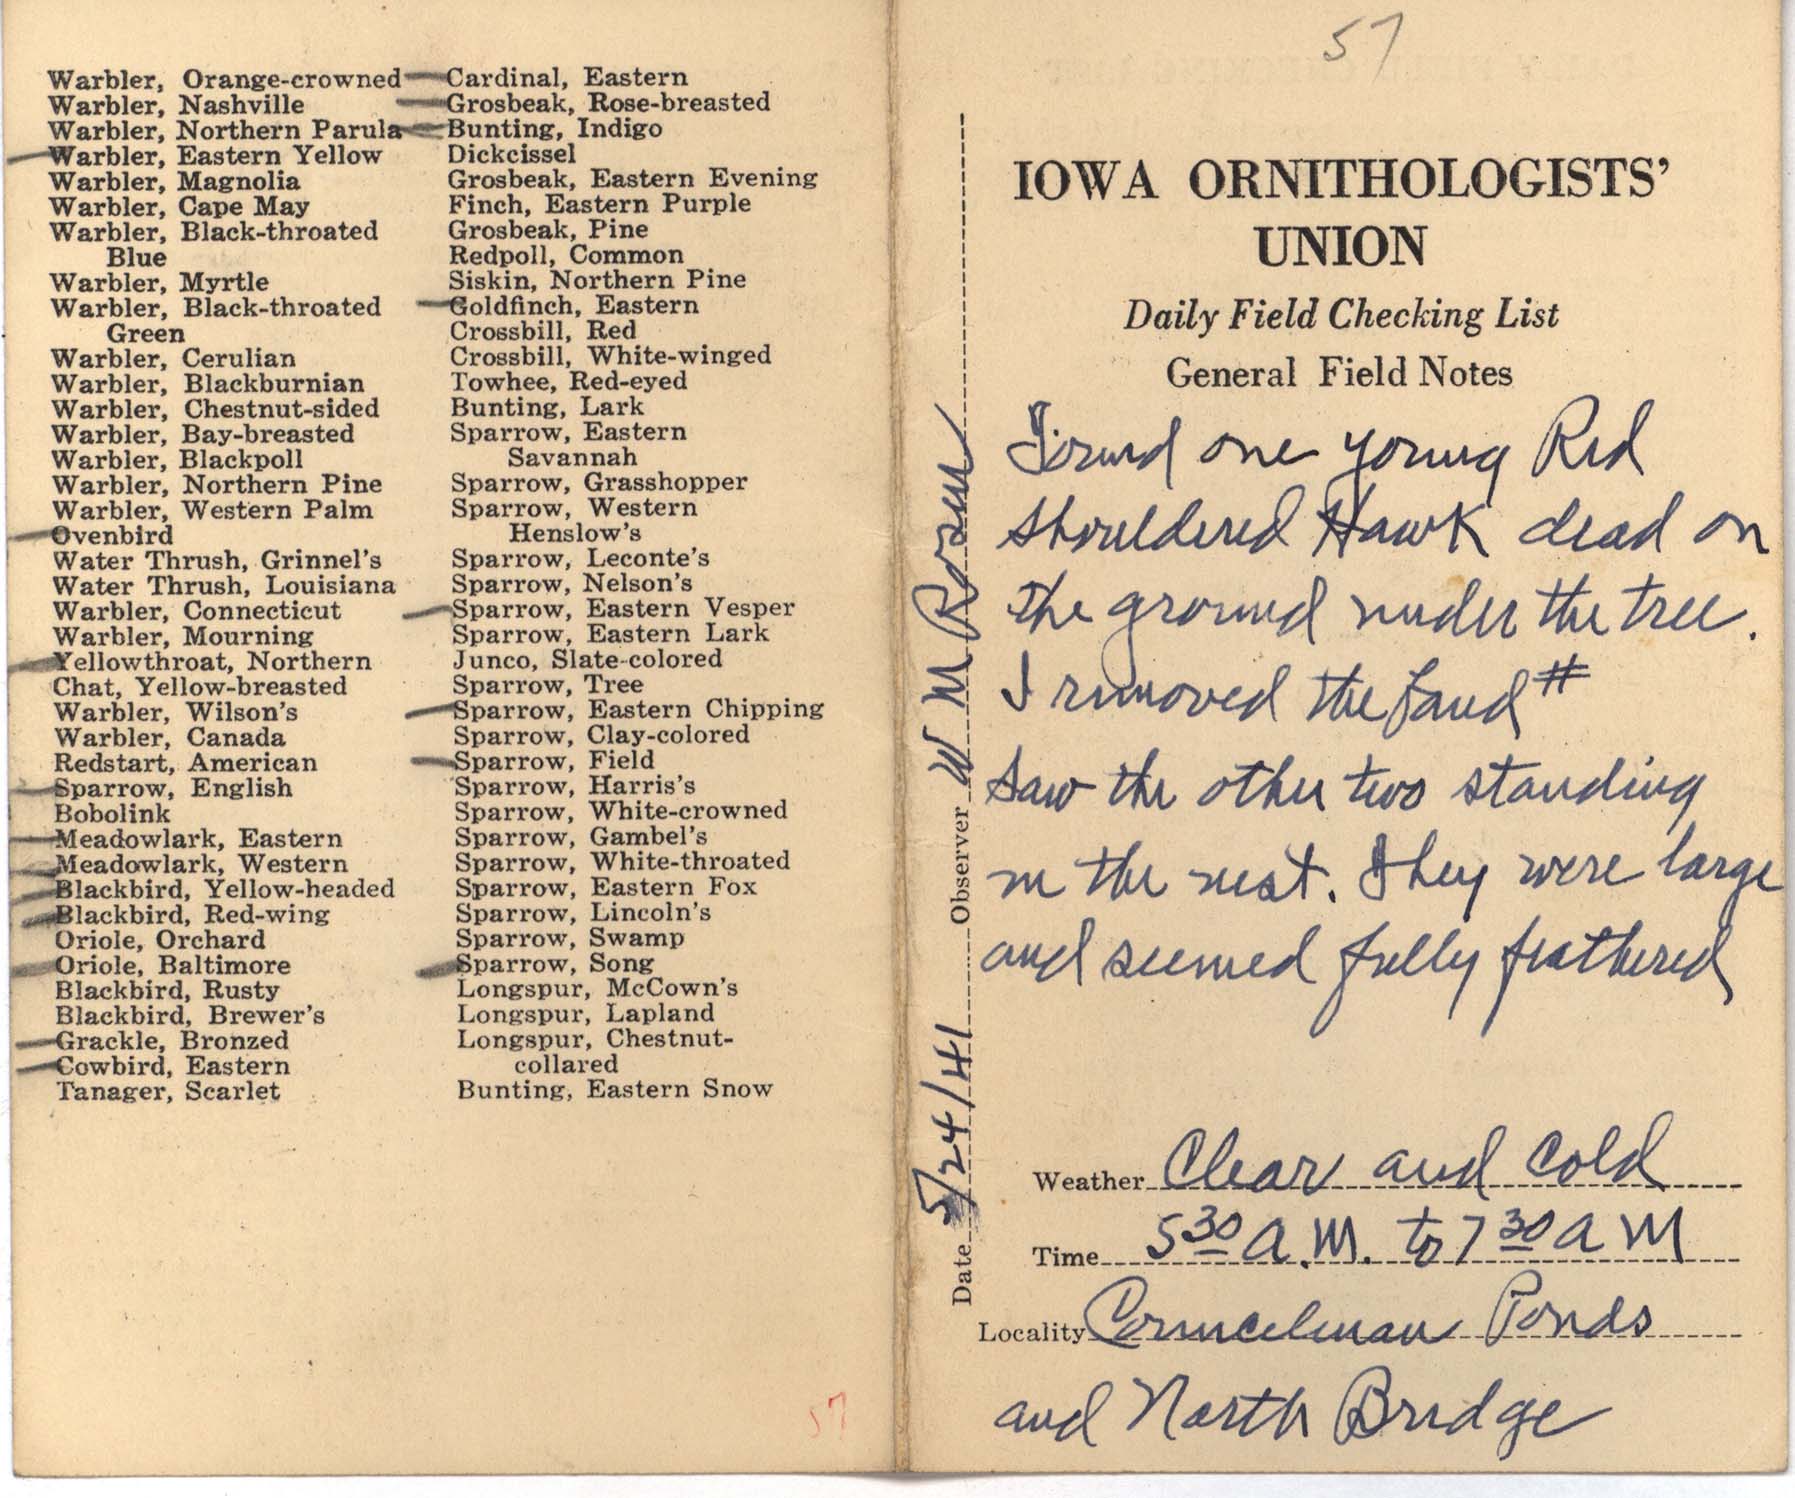 Daily field checking list by Walter Rosene, May 24, 1941